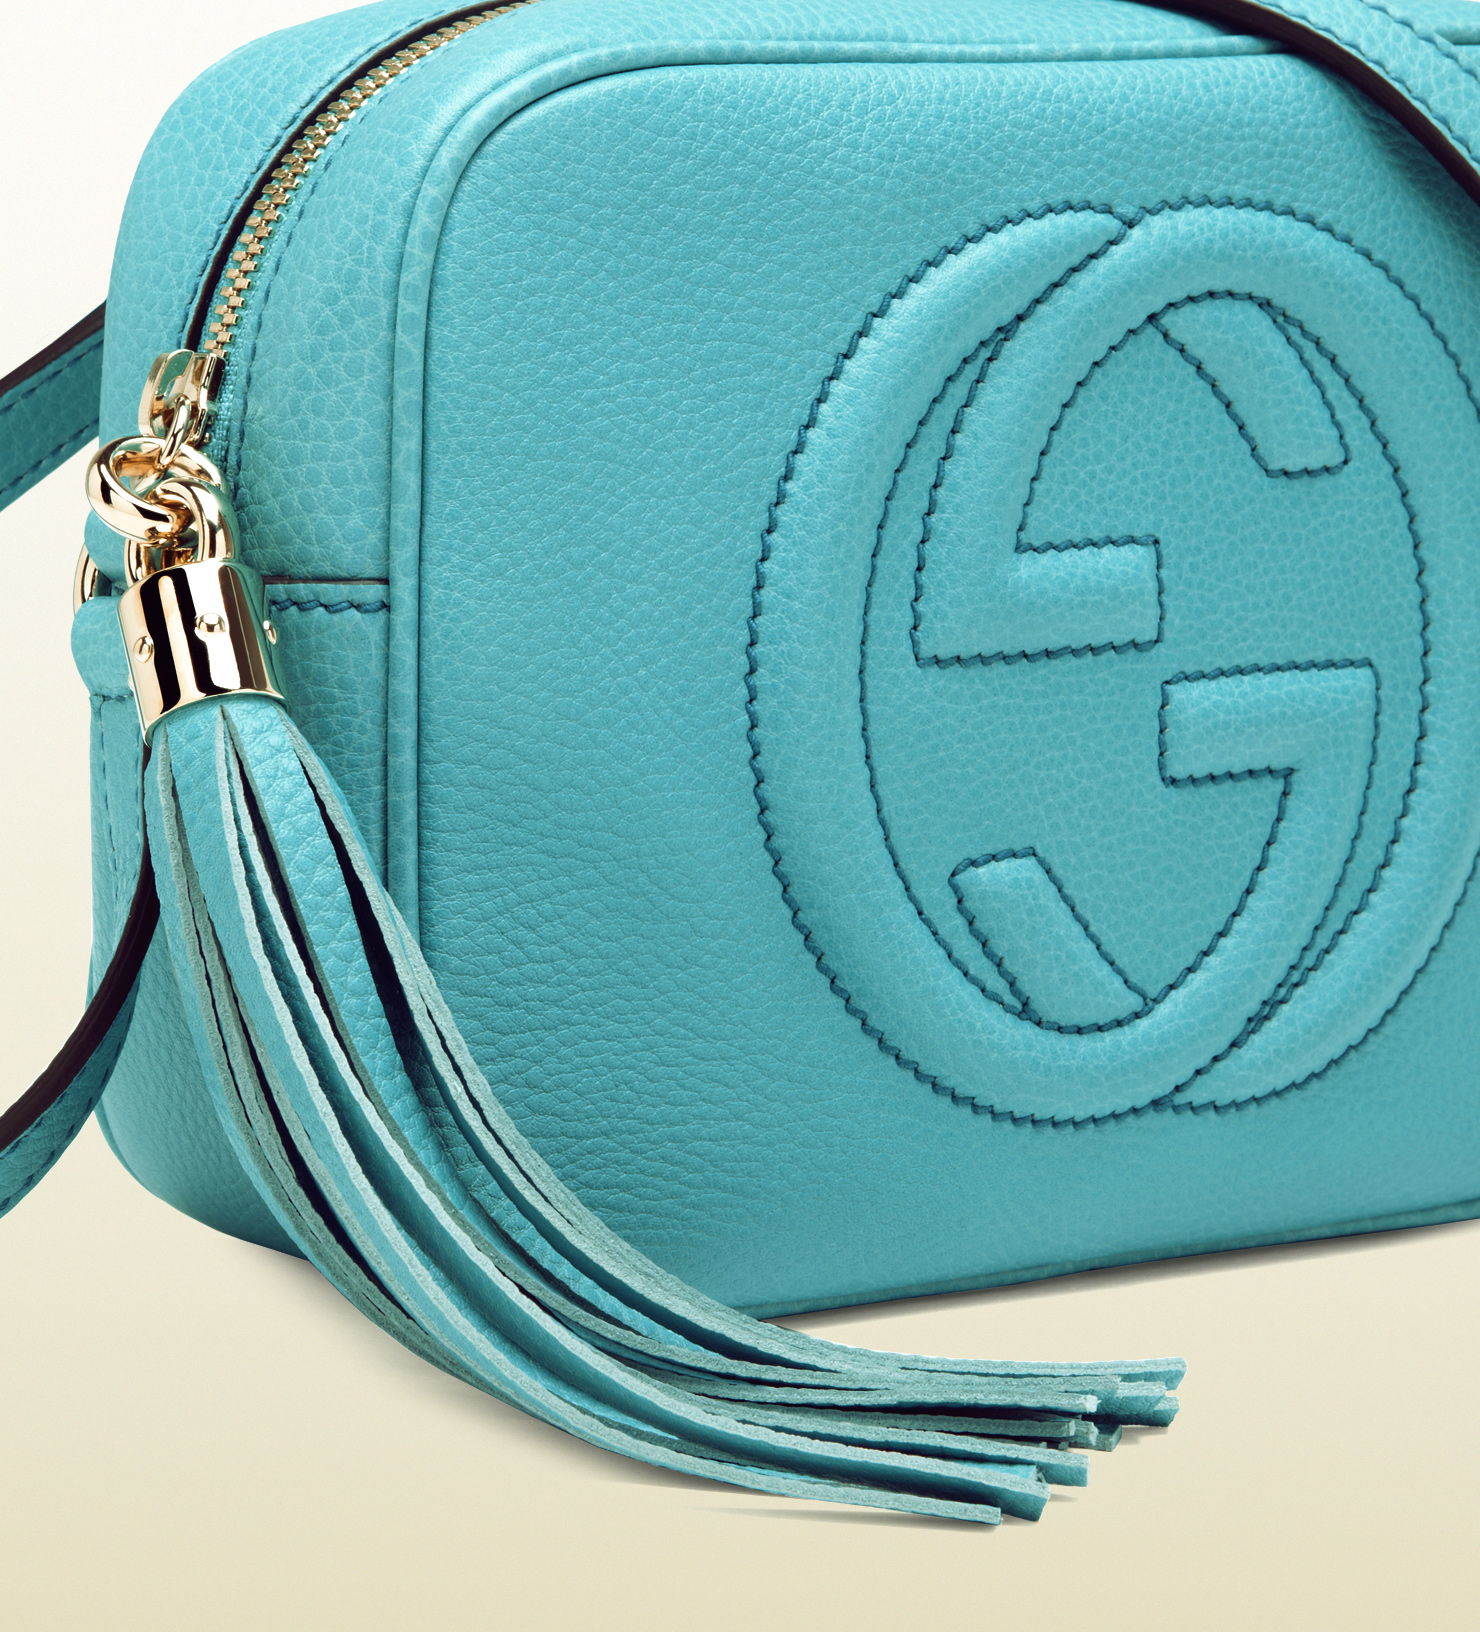 Lyst - Gucci Soho Light Blue Leather Disco Bag in Blue